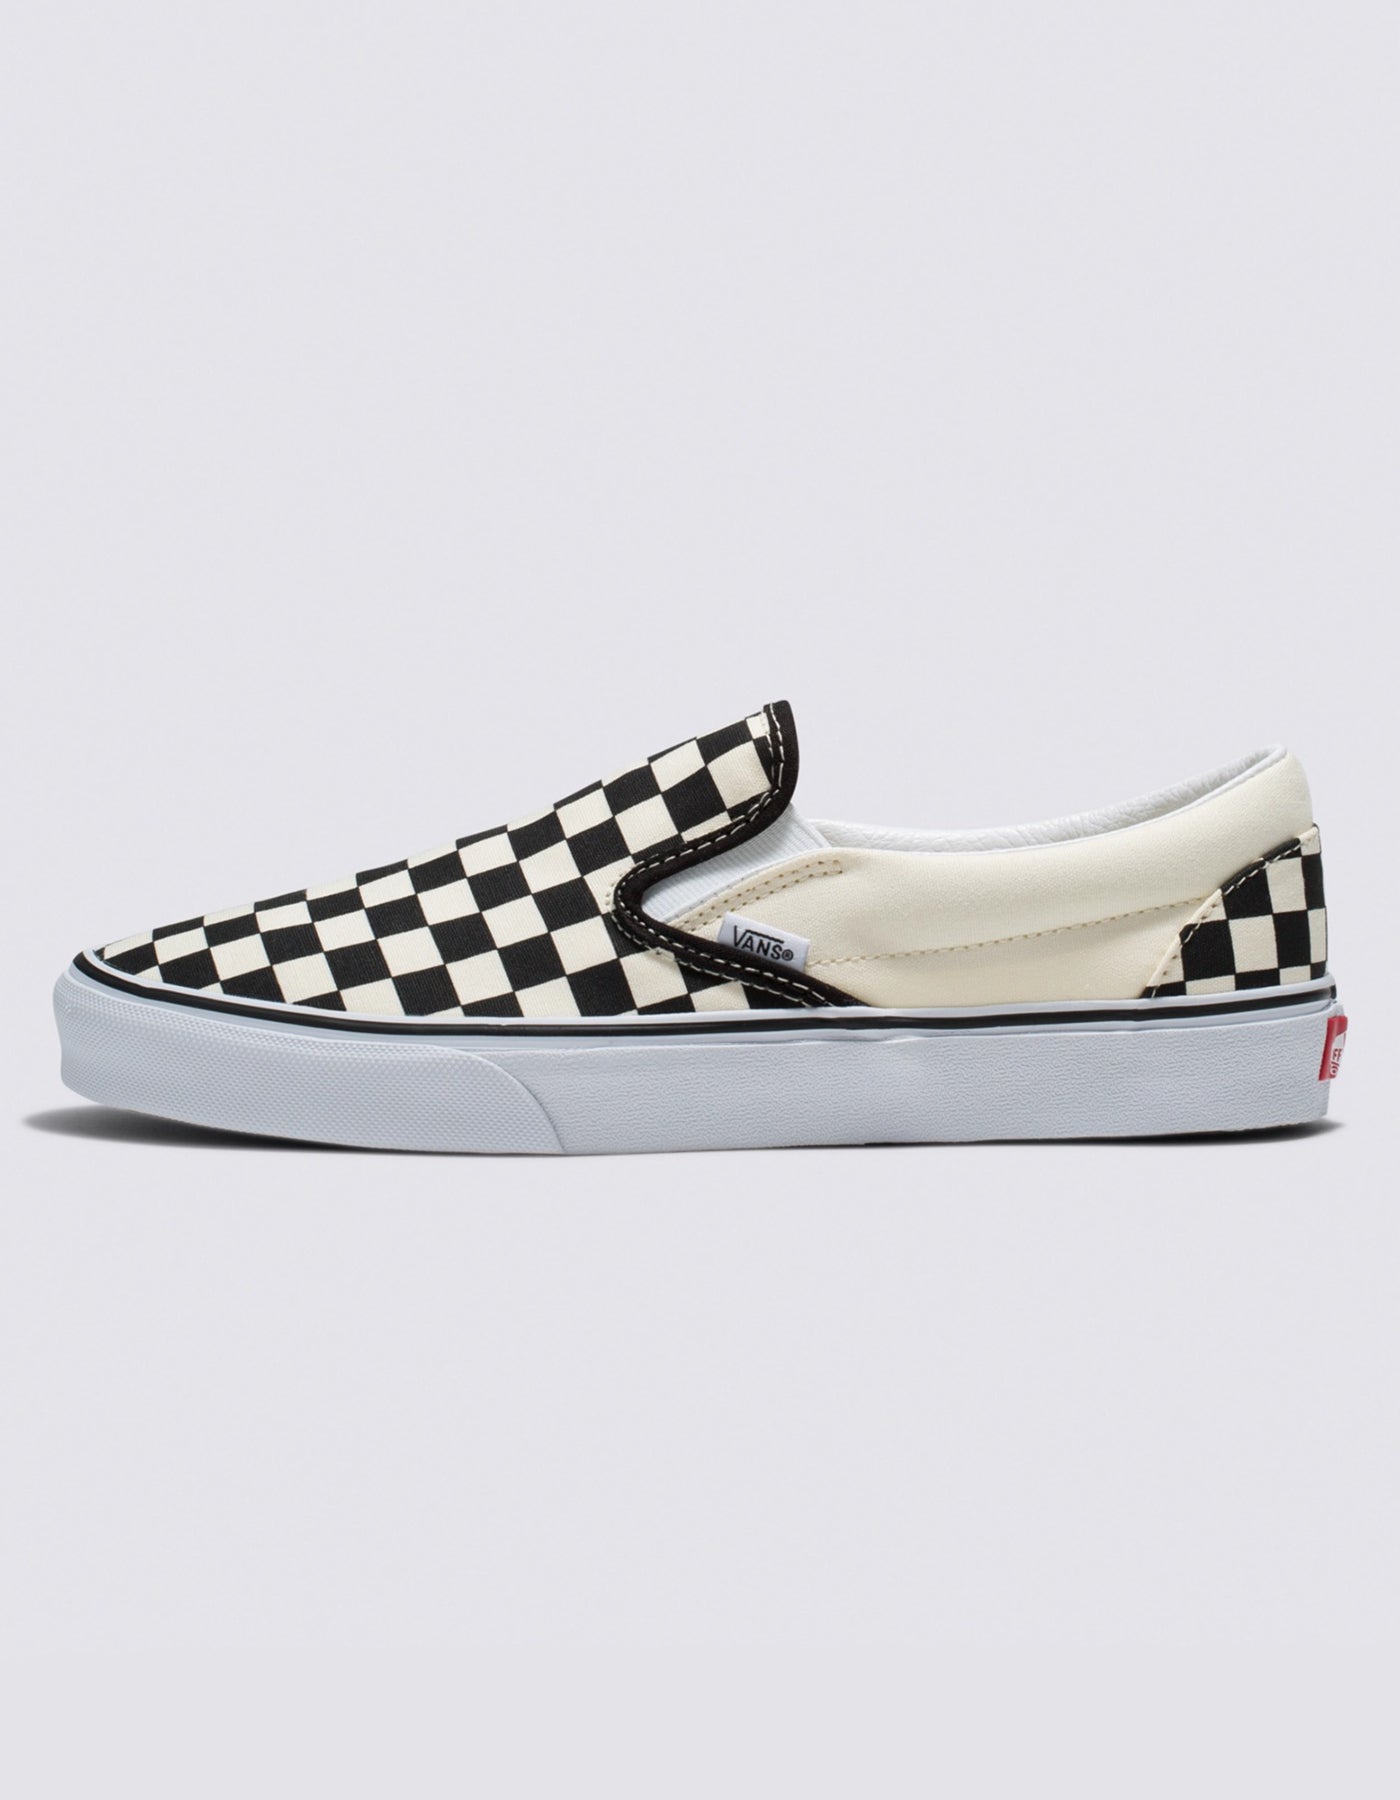 Vans Classic Slip-on Checkerboard Black/White Shoes